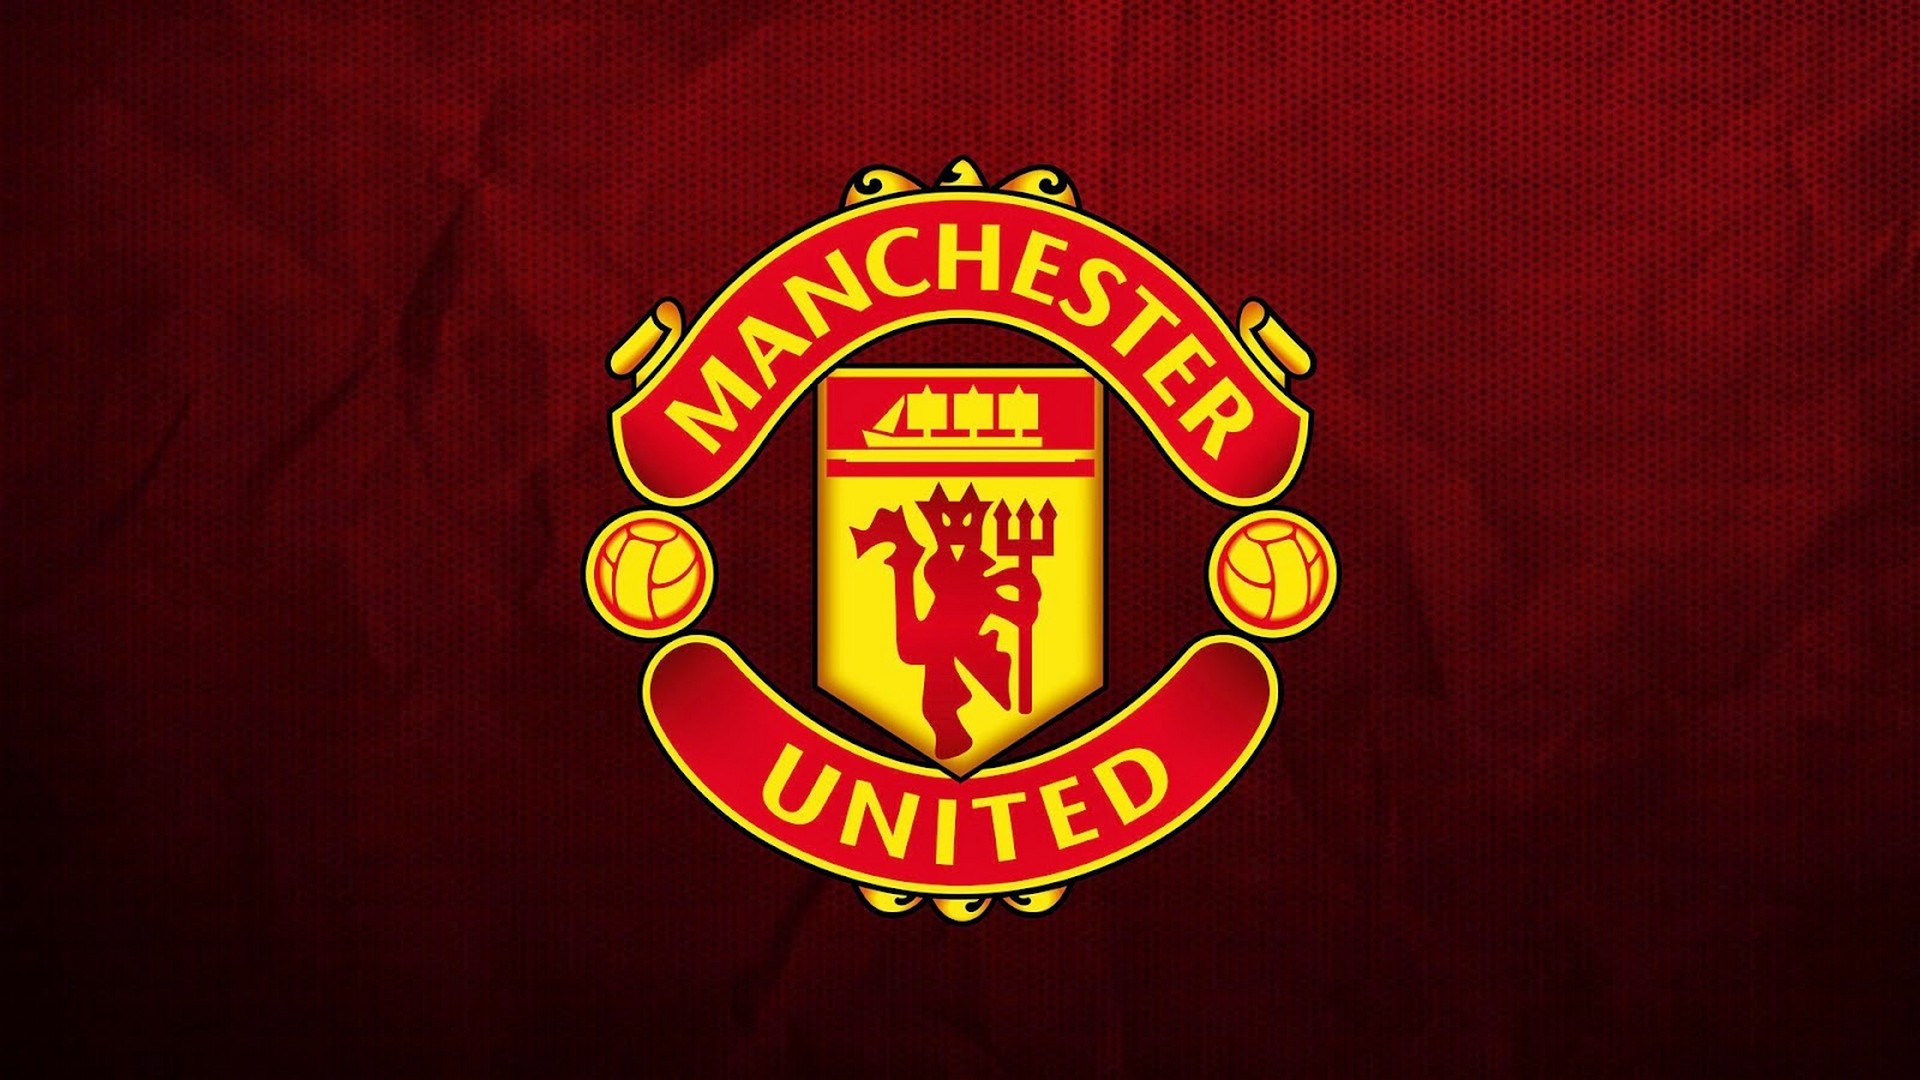 Manchester United Mac Backgrounds With high-resolution 1920X1080 pixel. You can use this wallpaper for your Desktop Computers, Mac Screensavers, Windows Backgrounds, iPhone Wallpapers, Tablet or Android Lock screen and another Mobile device